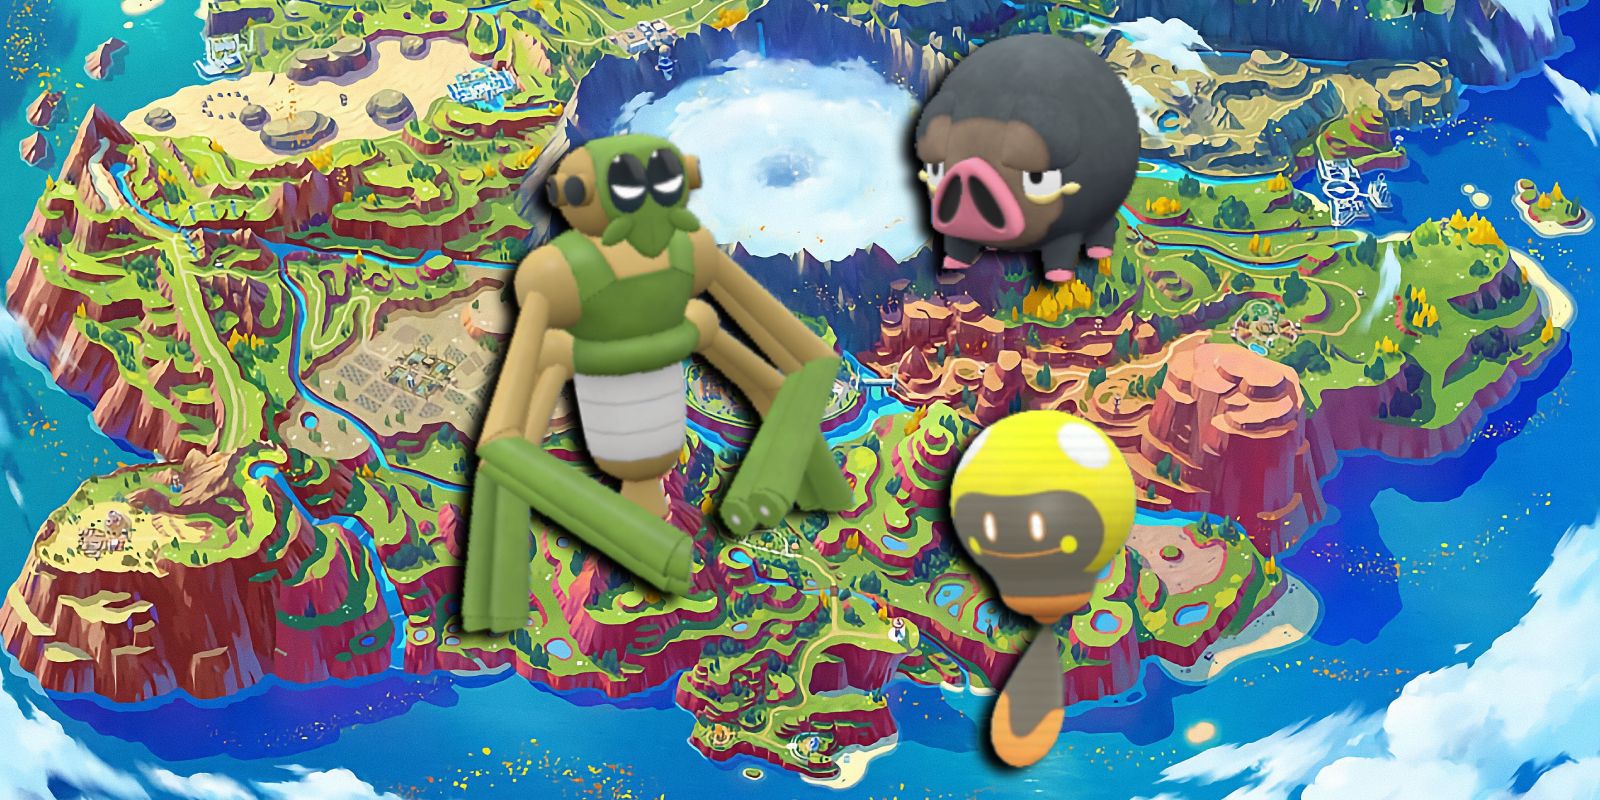 Lechok, Tadbulb, and Spidops in Pokémon Scarlet and Violet.